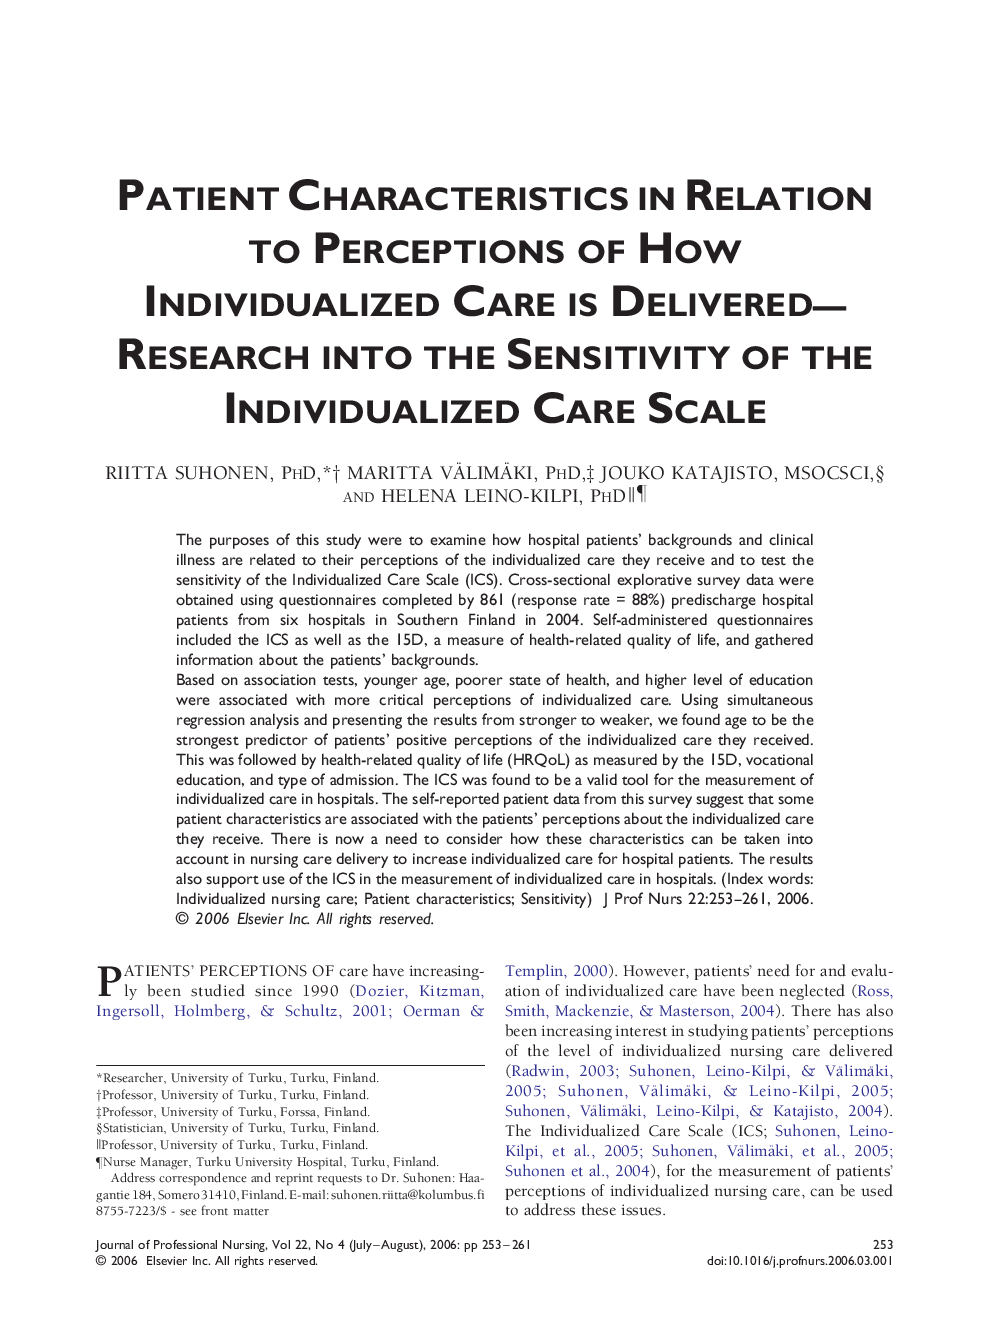 Patient Characteristics in Relation to Perceptions of How Individualized Care is Delivered—Research Into the Sensitivity of the Individualized Care Scale